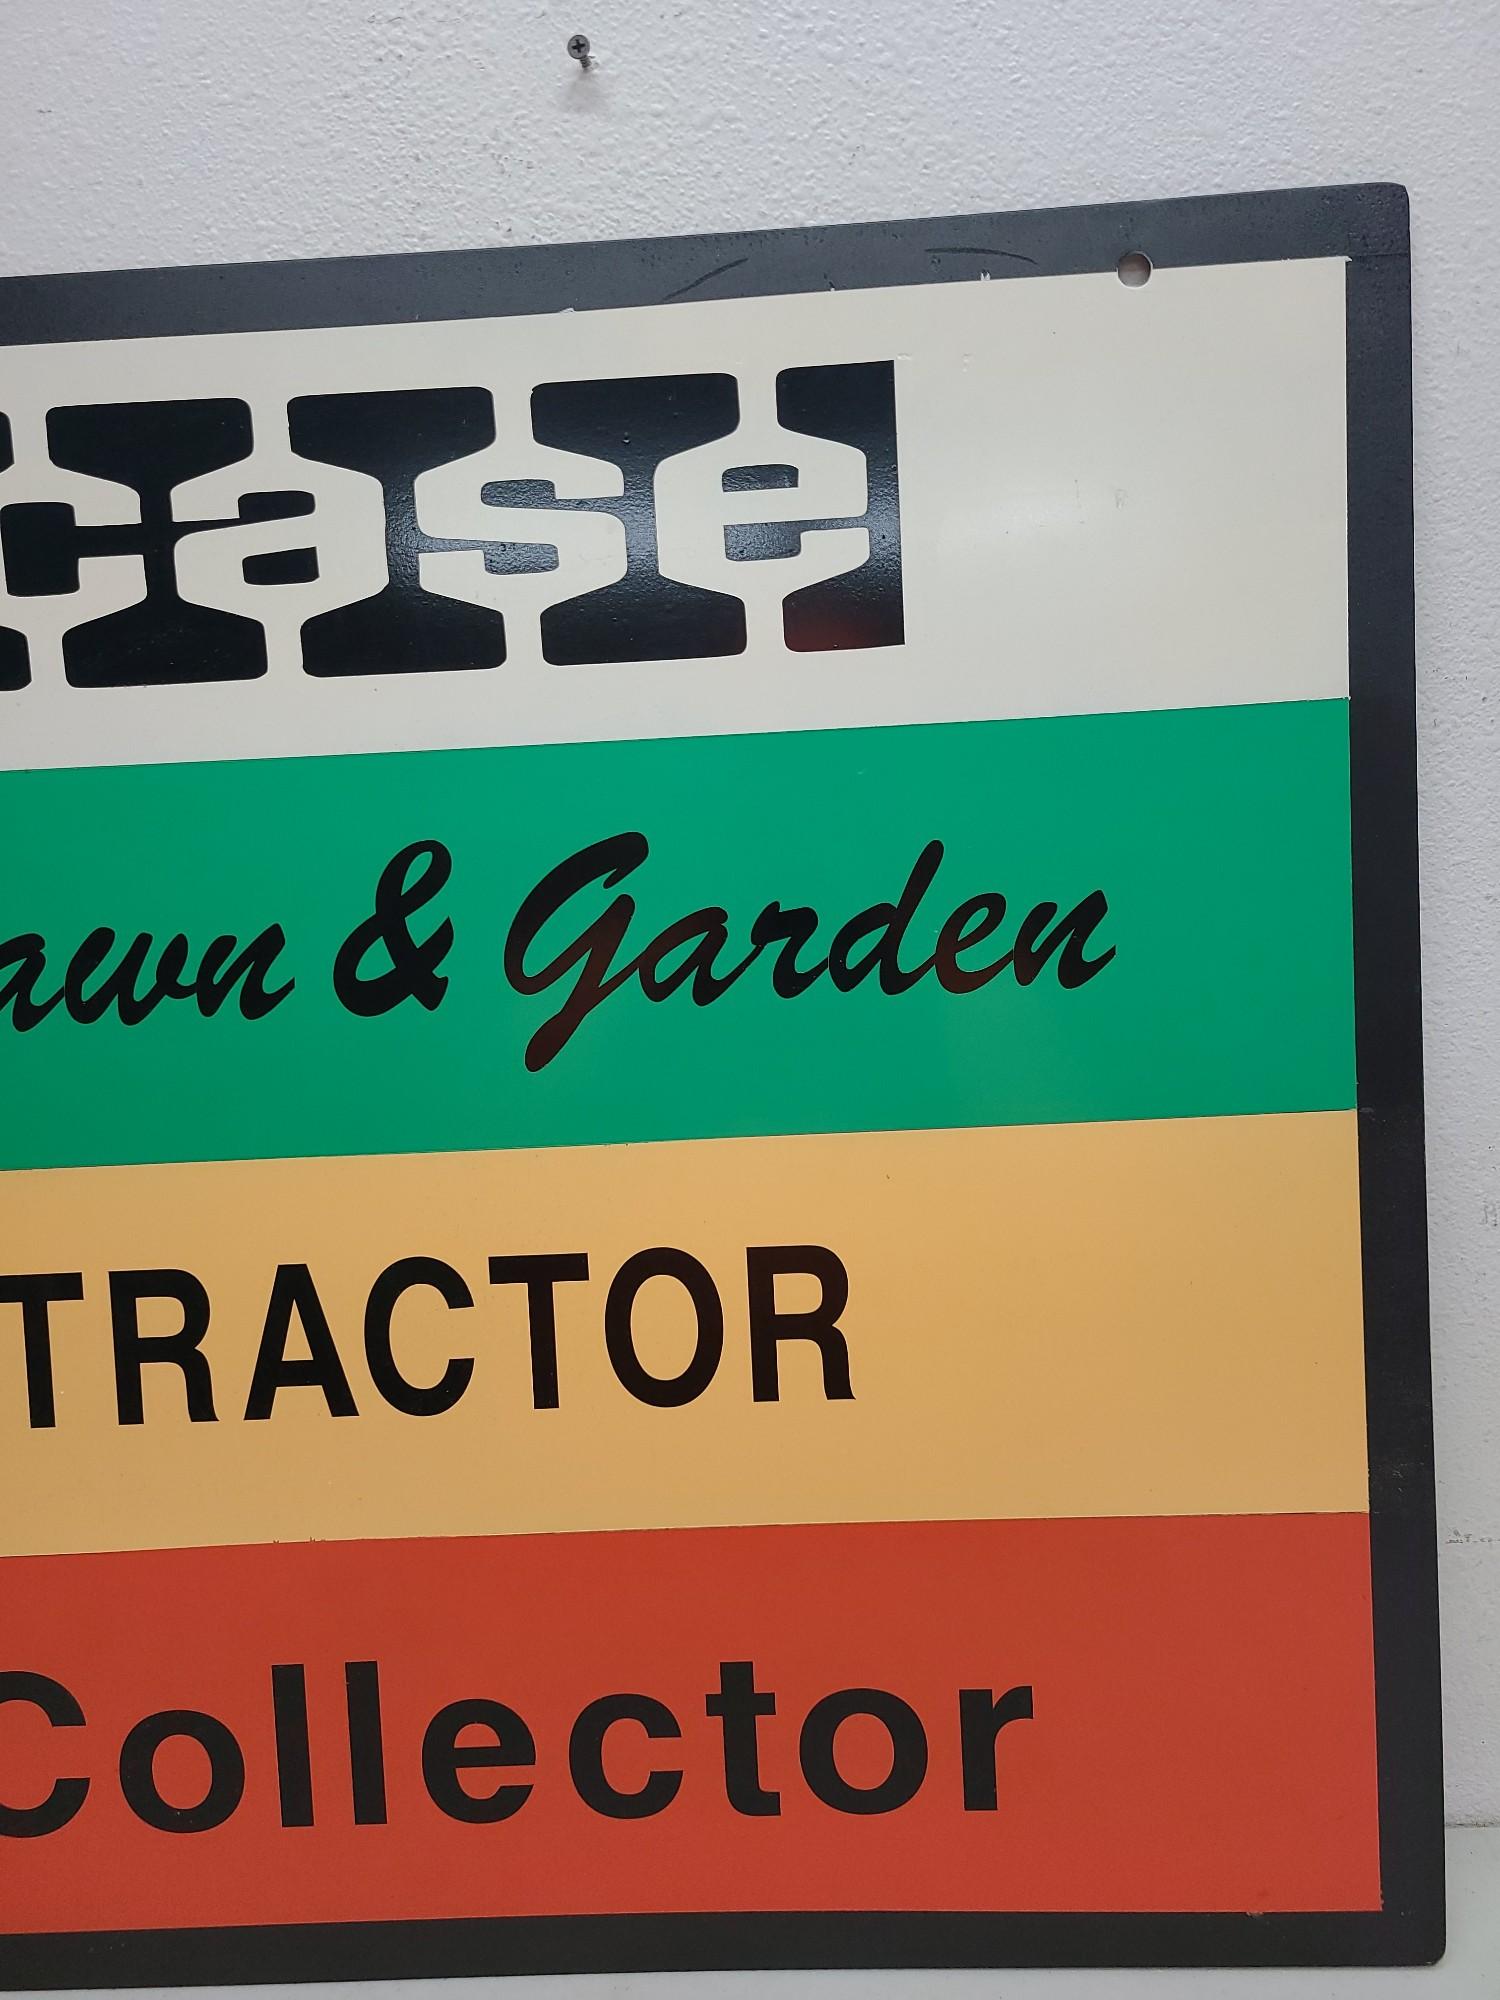 DS Metal, Case  Lawn & Garden Tractor Collector Sign